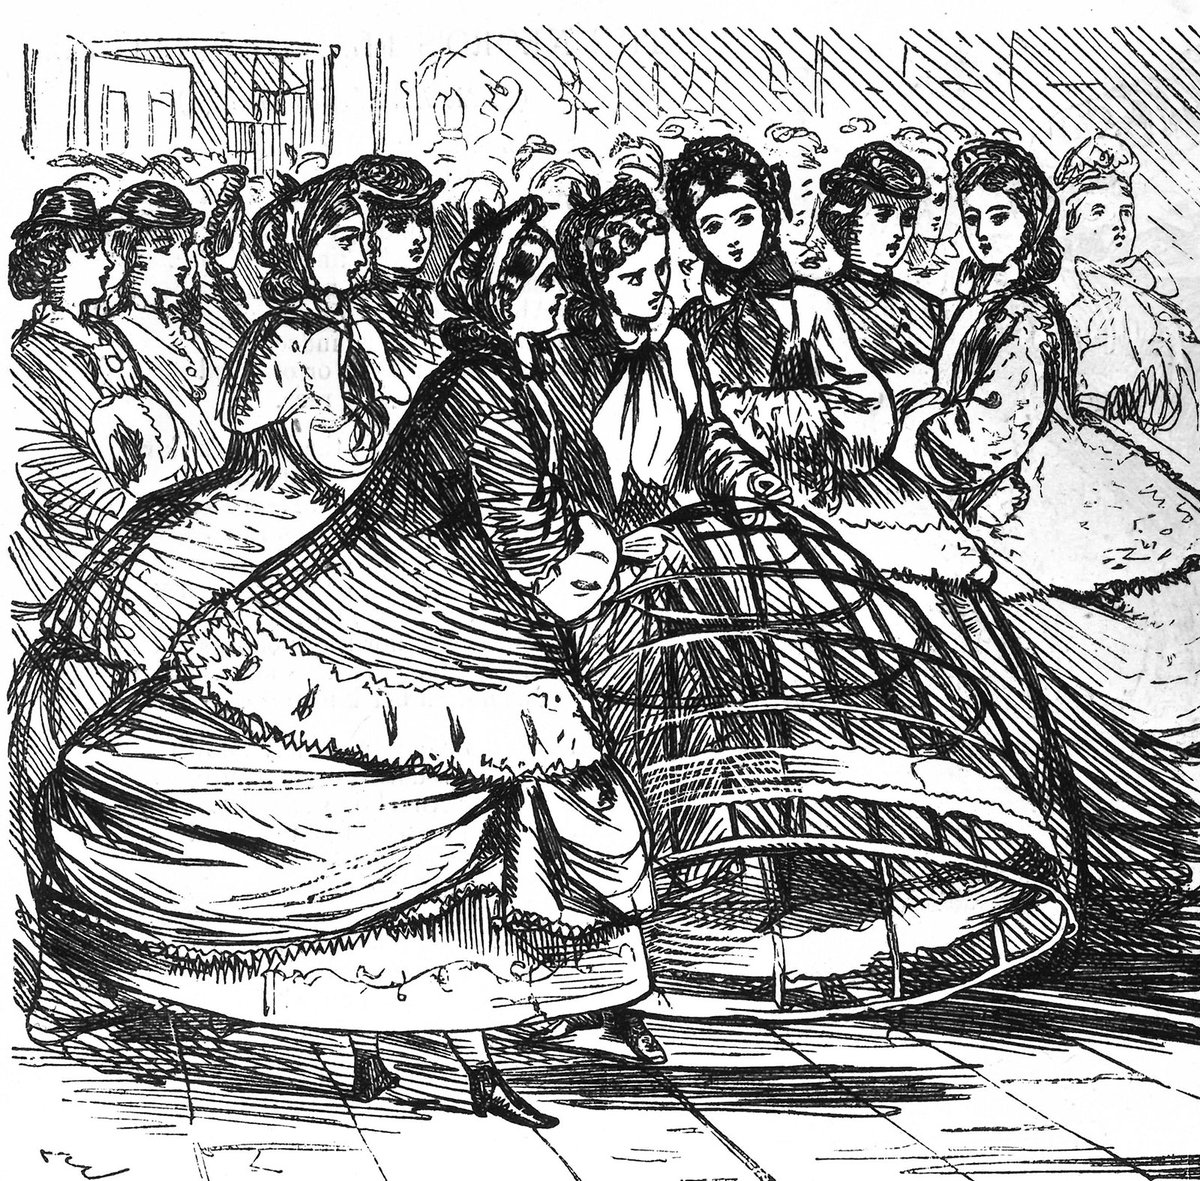 This crinoline, which was basically a metal petticoat or cage with hoops, was easier to wear than the layers of starched petticoats.